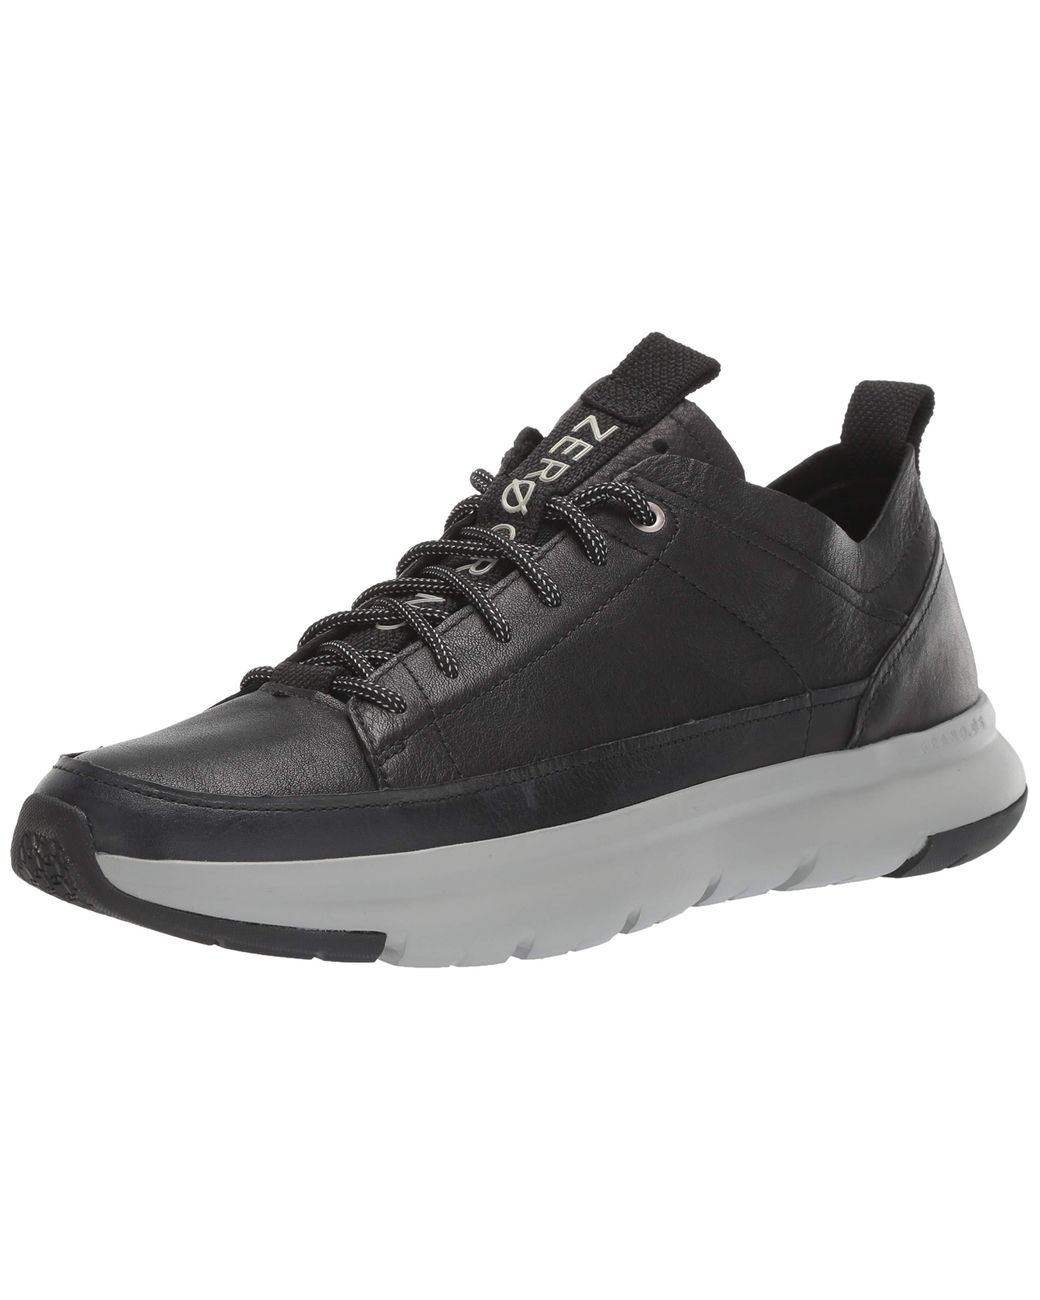 Cole Haan Homme zerogrand Trainer Black Cross Training Chaussures Taille 7 